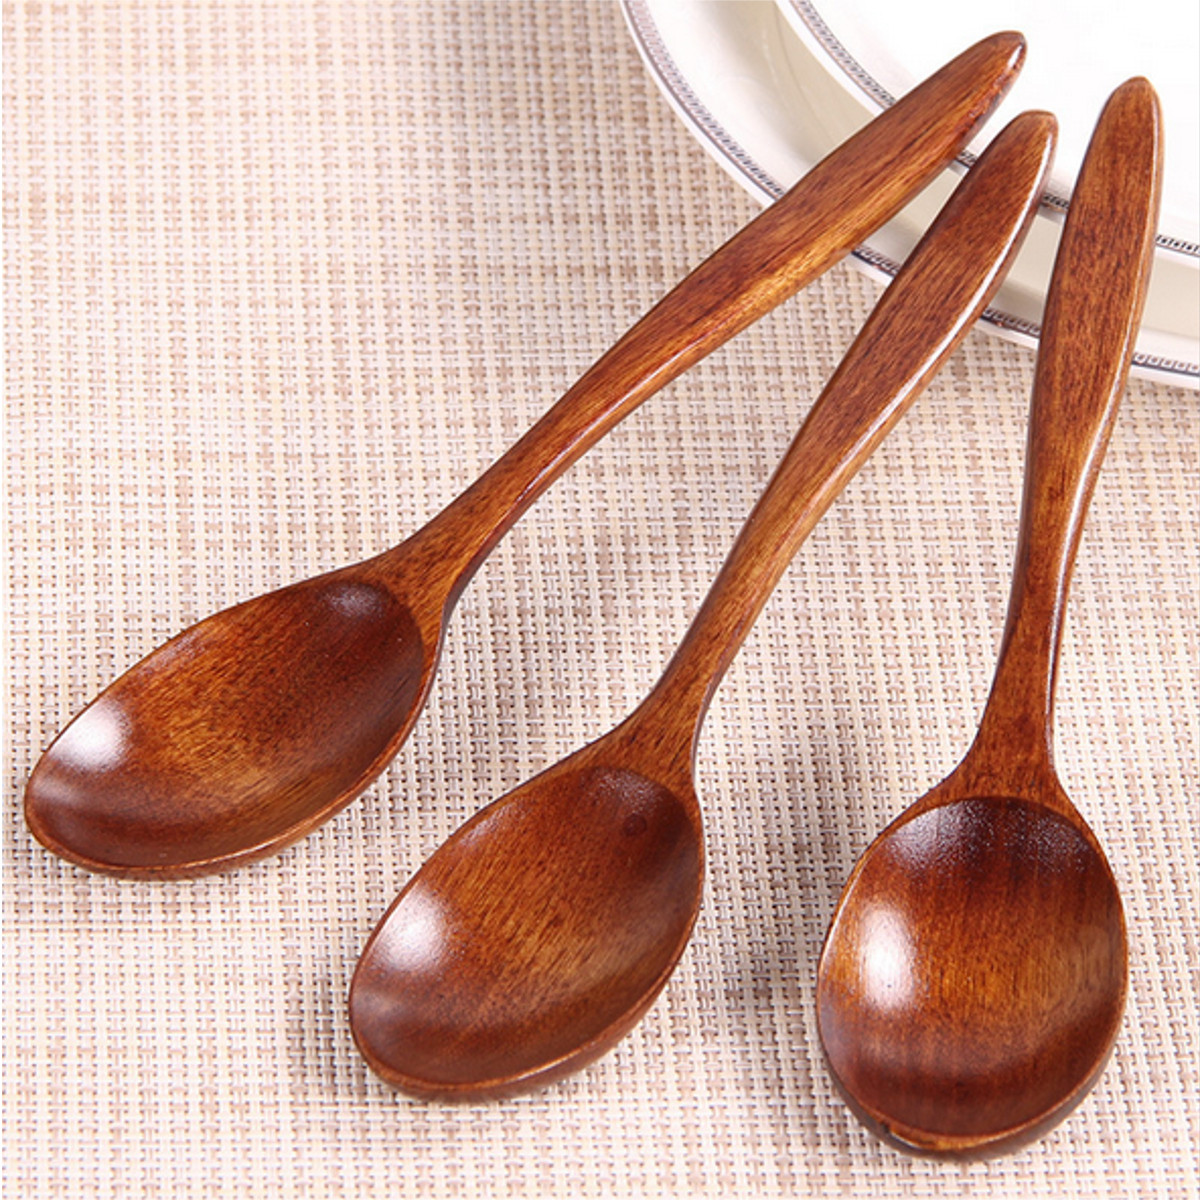 5Pcs-Wooden-Cooking-Kitchen-Utensil-Coffee-Tea-Ice-Cream-Soup-Caterin-Spoon-Tool-1067937-6